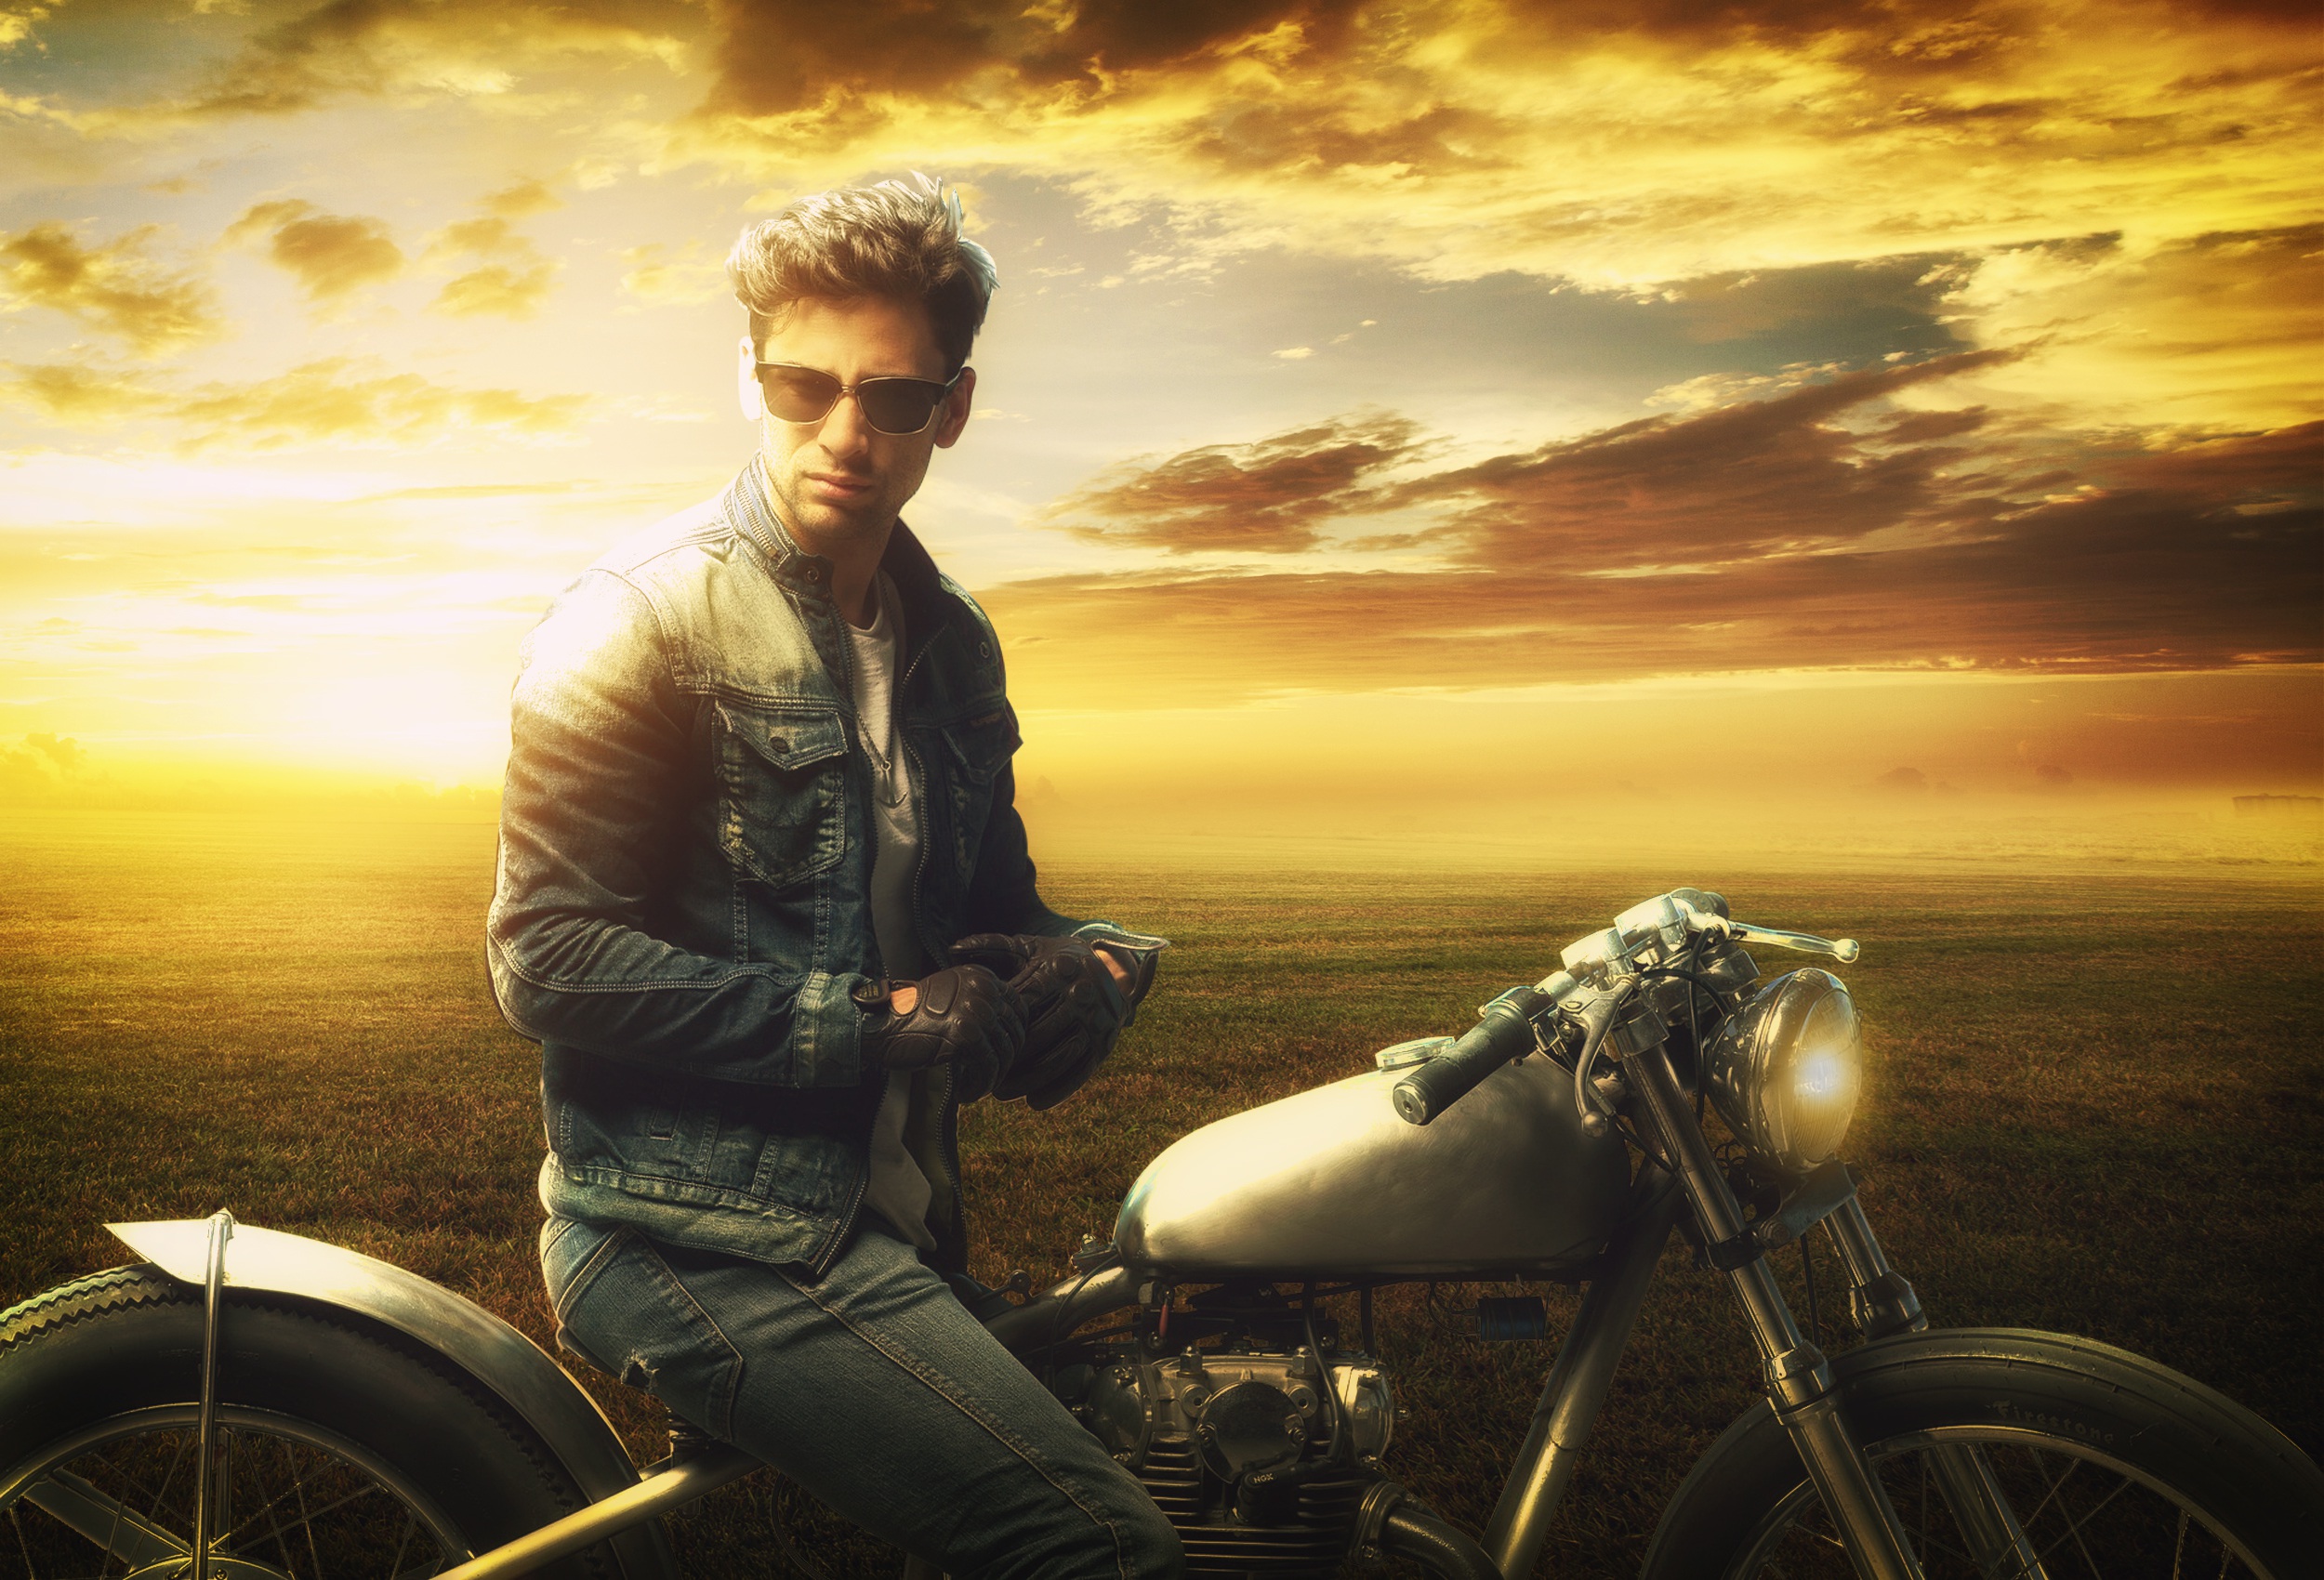 Wallpaper Motorcycle Cool Motorcycling Movie Leather Jacket Background   Download Free Image